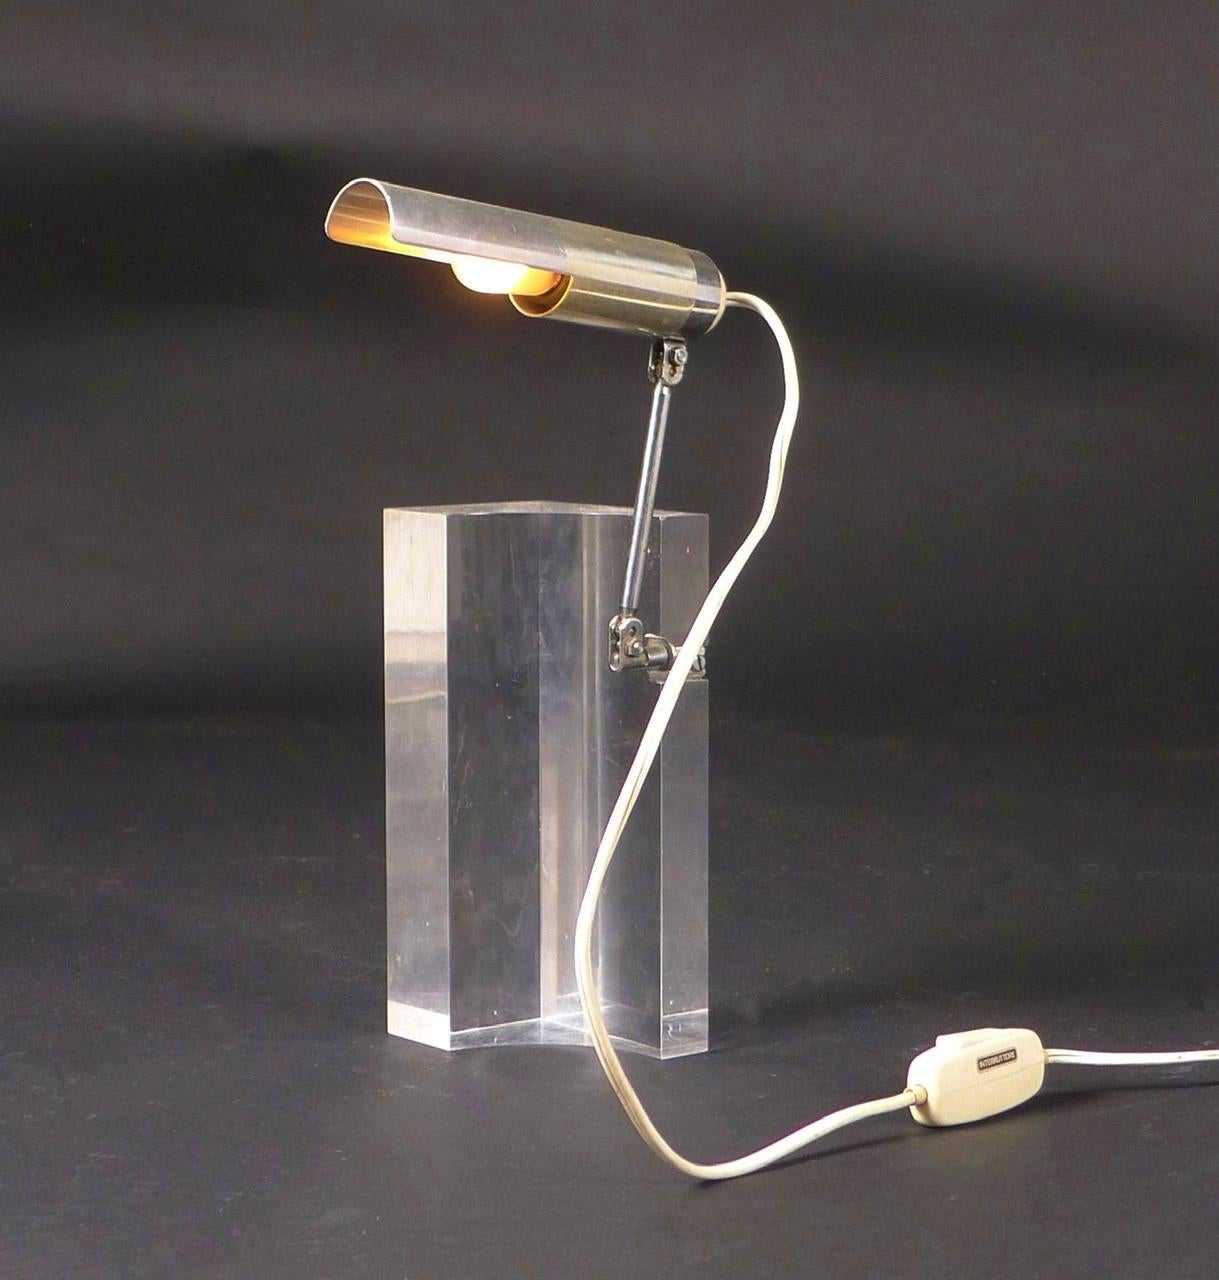 Filippo Panseca for Arteluce, Articulated Desk Light, 1960s.

The design comprises a clear perspex block with articulated aluminium arm and shade.  Both the arm and the shade adjust independently to shine and diffuse light as required.

Interior of